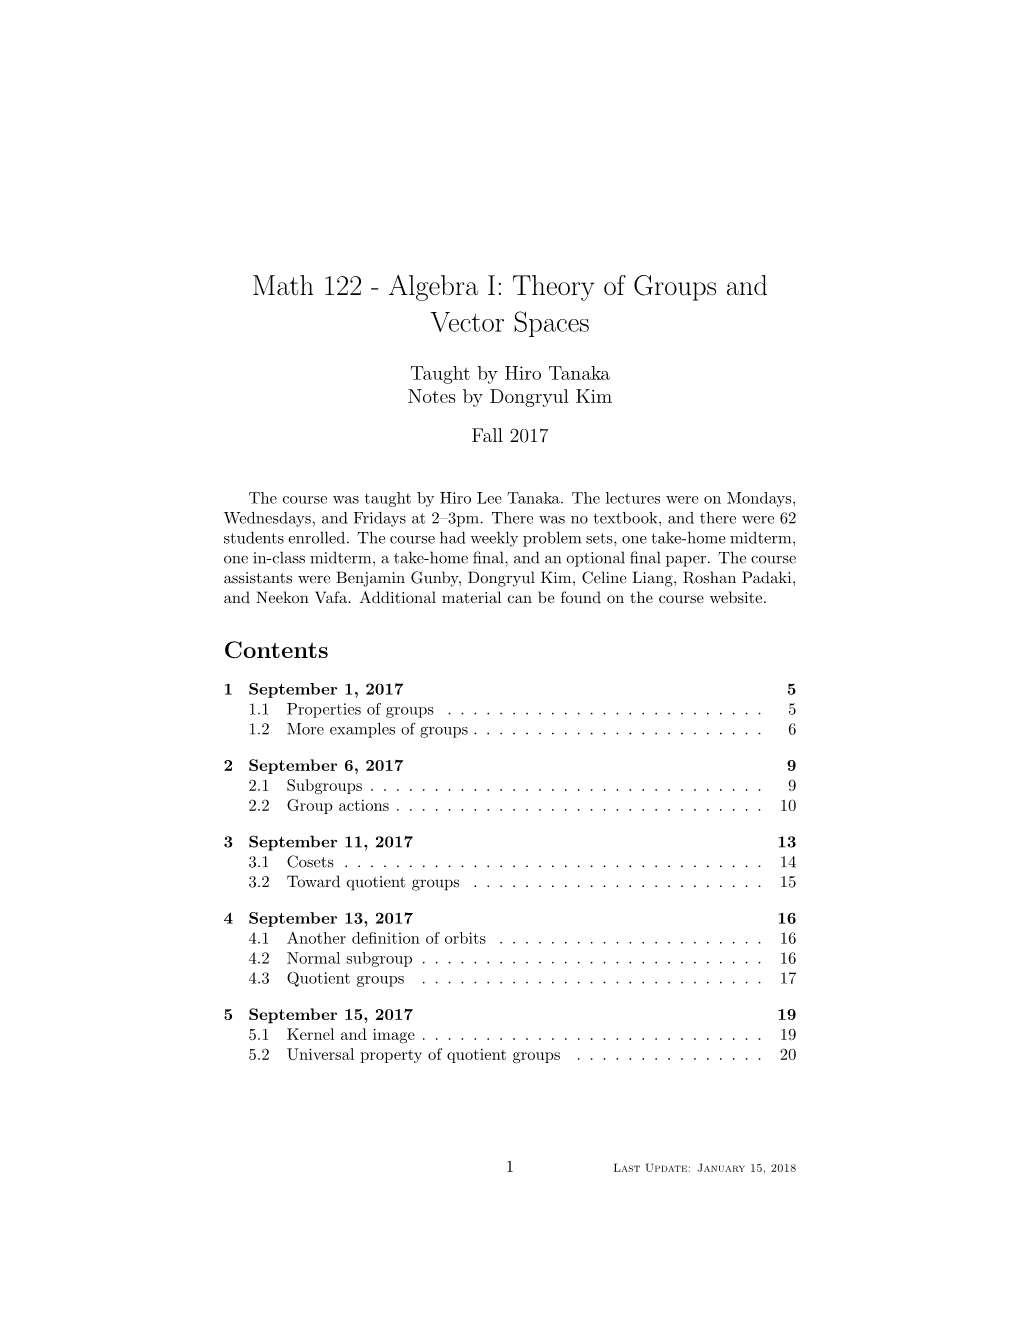 Math 122 - Algebra I: Theory of Groups and Vector Spaces